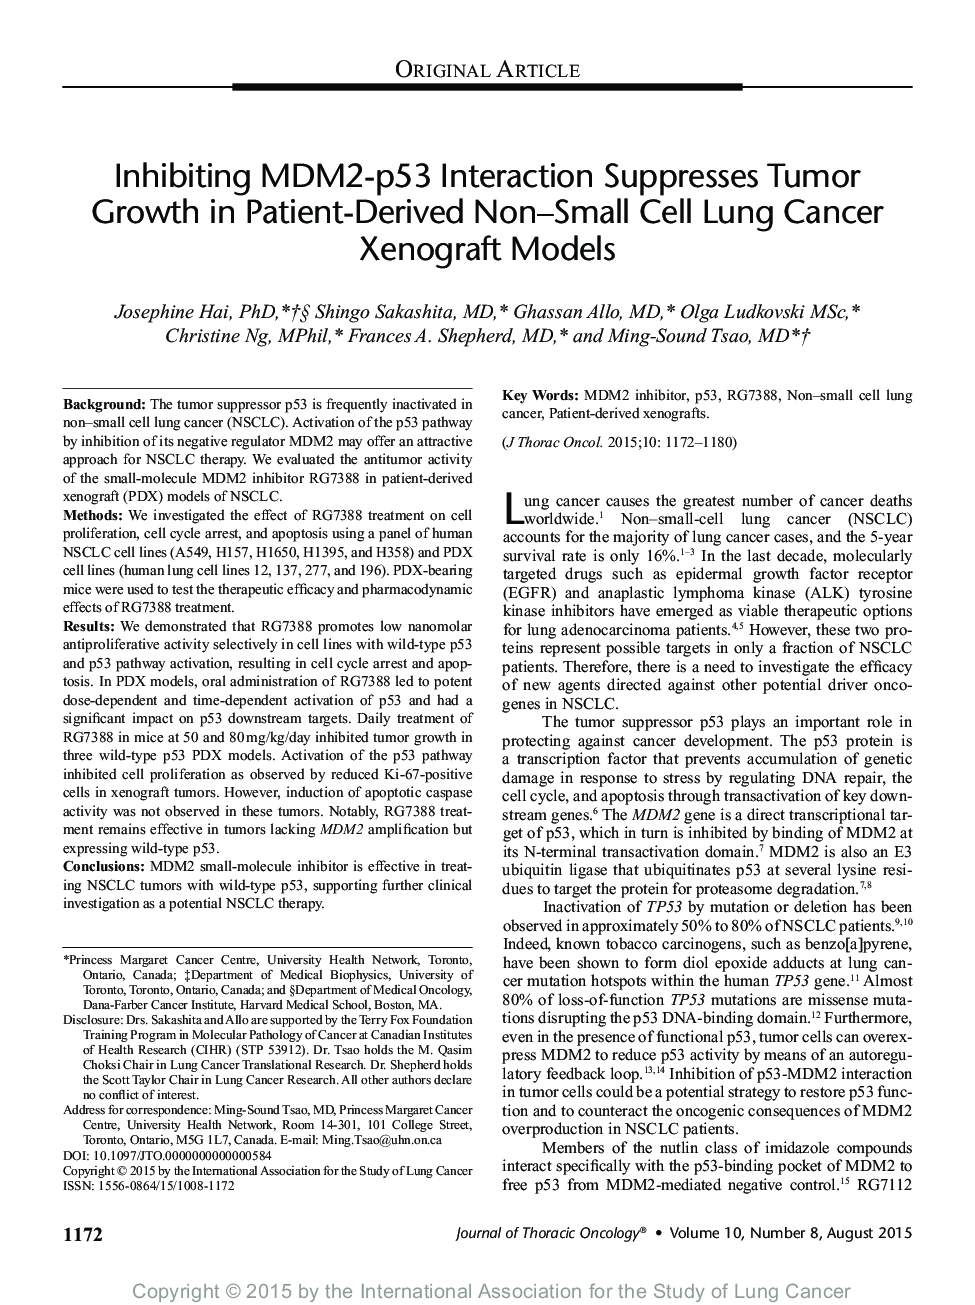 Inhibiting MDM2-p53 Interaction Suppresses Tumor Growth in Patient-Derived Non-Small Cell Lung Cancer Xenograft Models